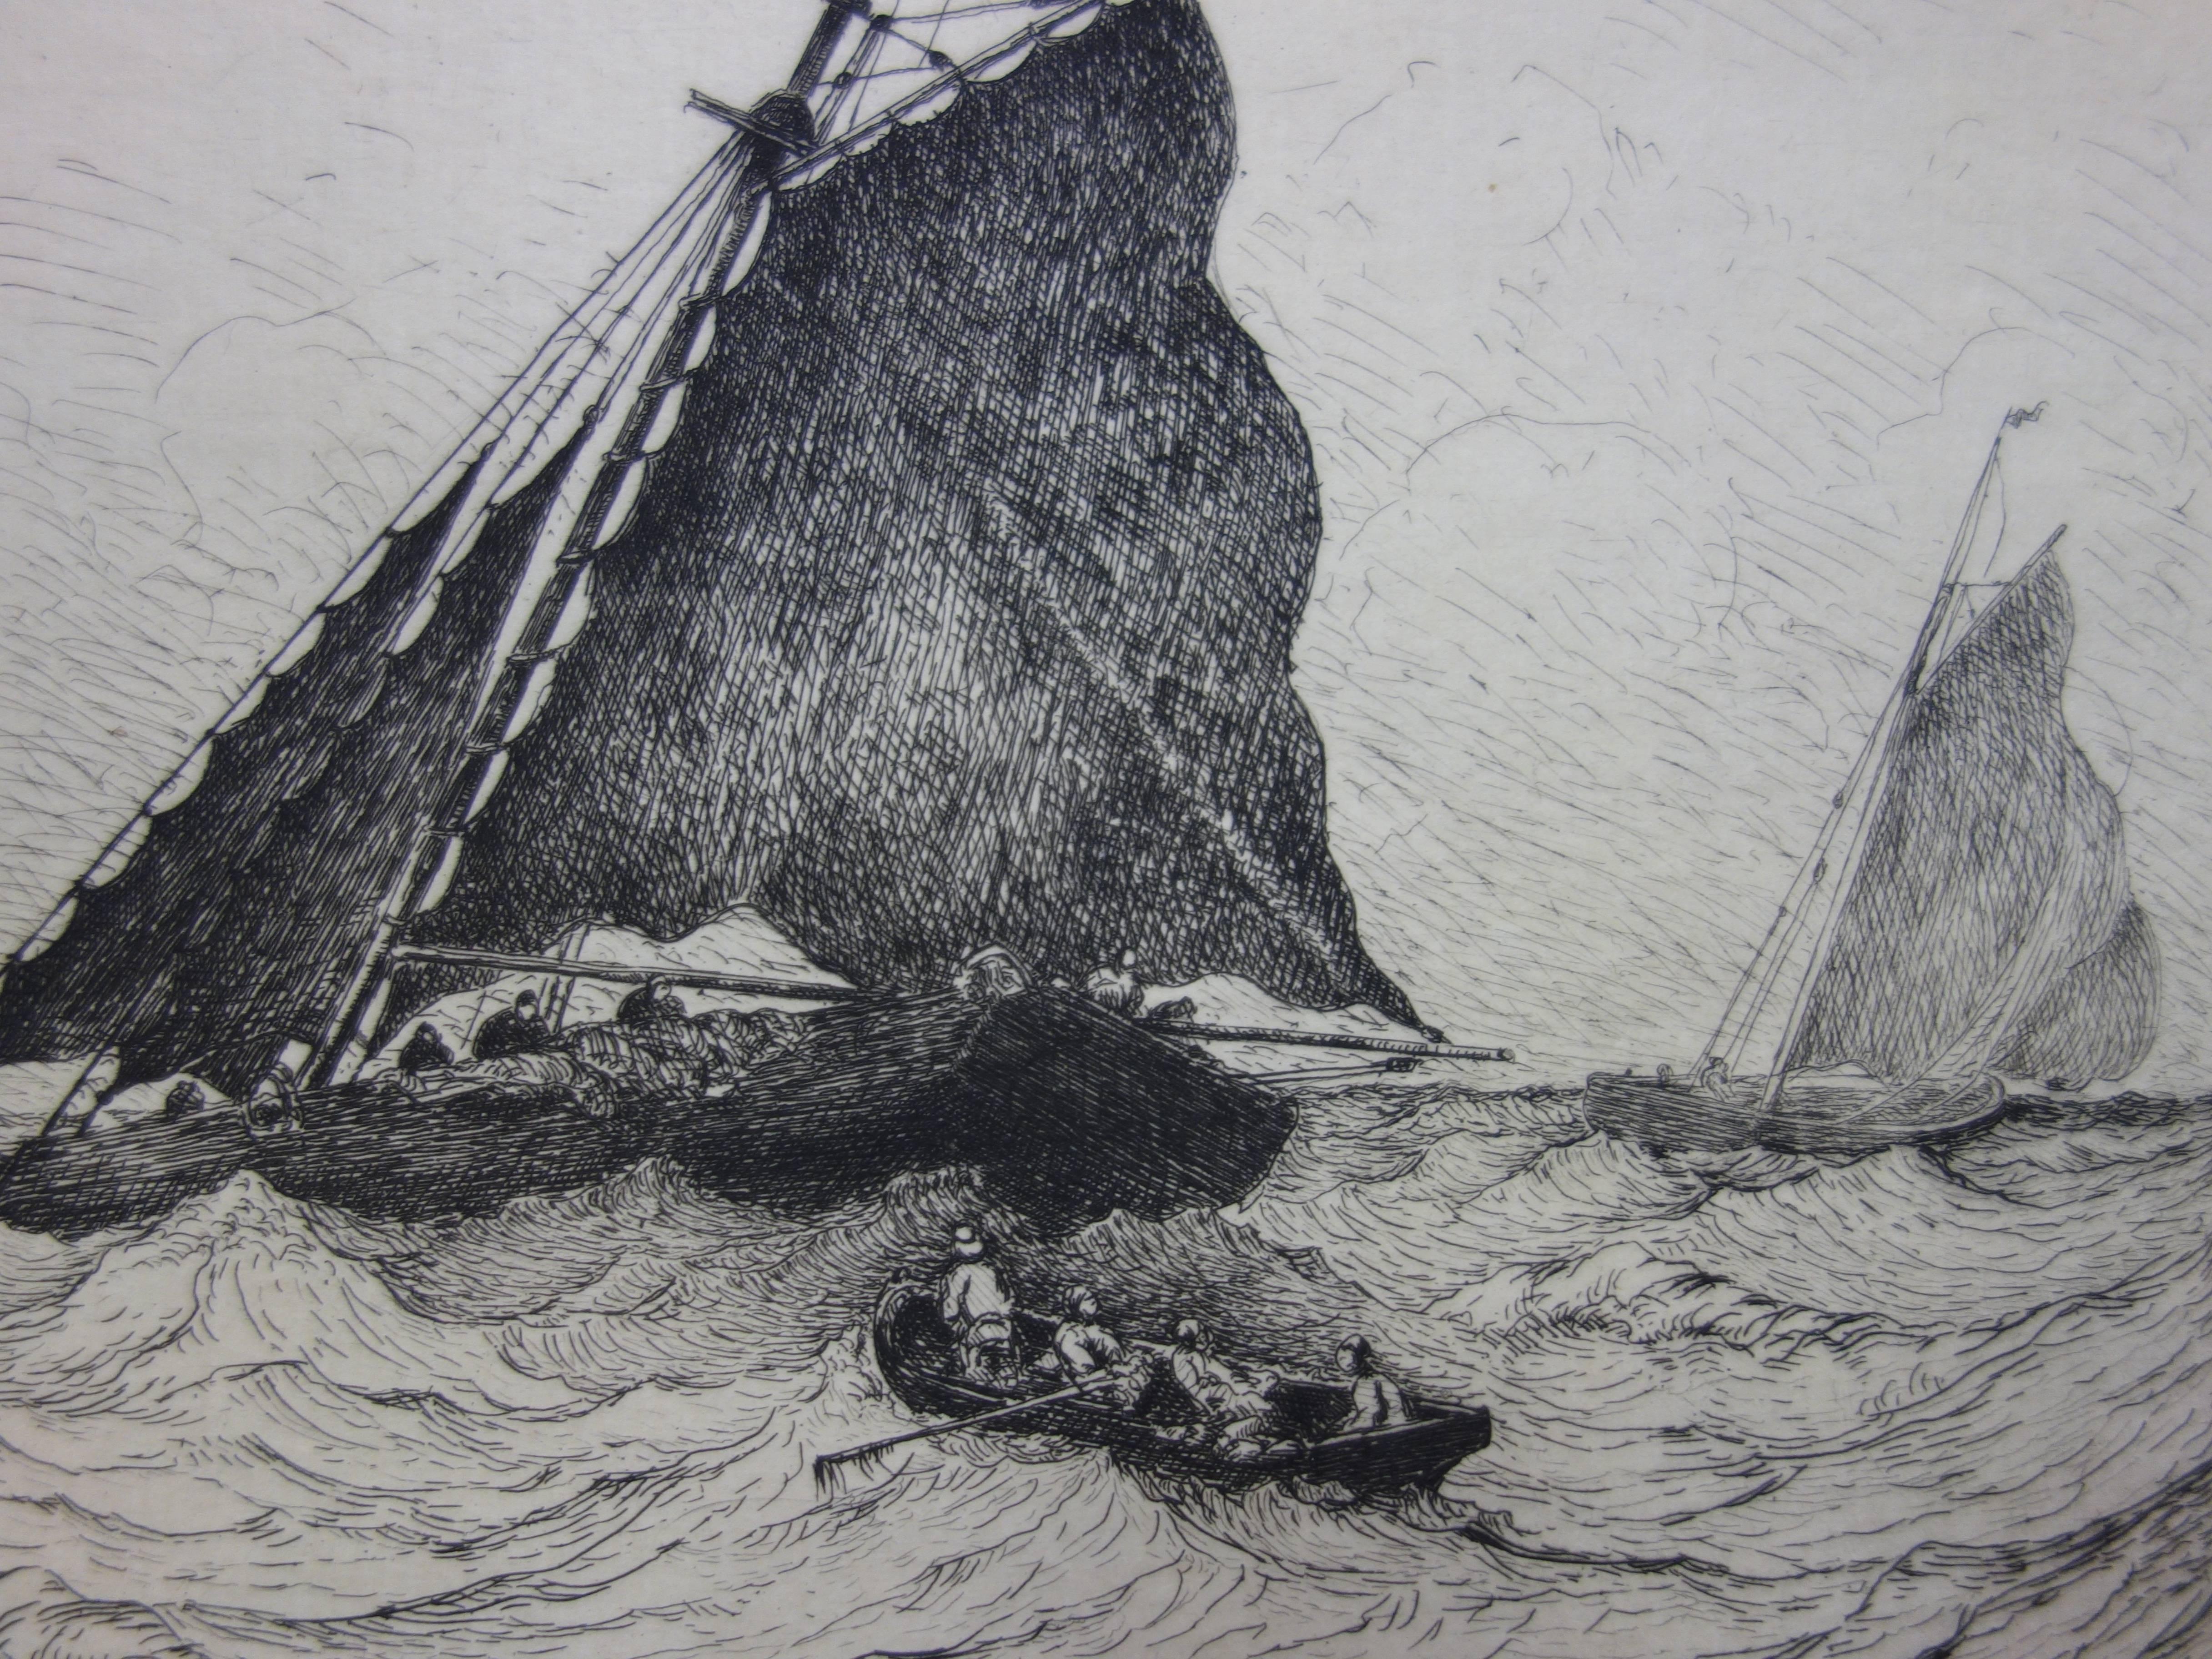 Rescue at Sea during the Storm - Original etching - Gray Figurative Print by Pierre Emile Berthelemy